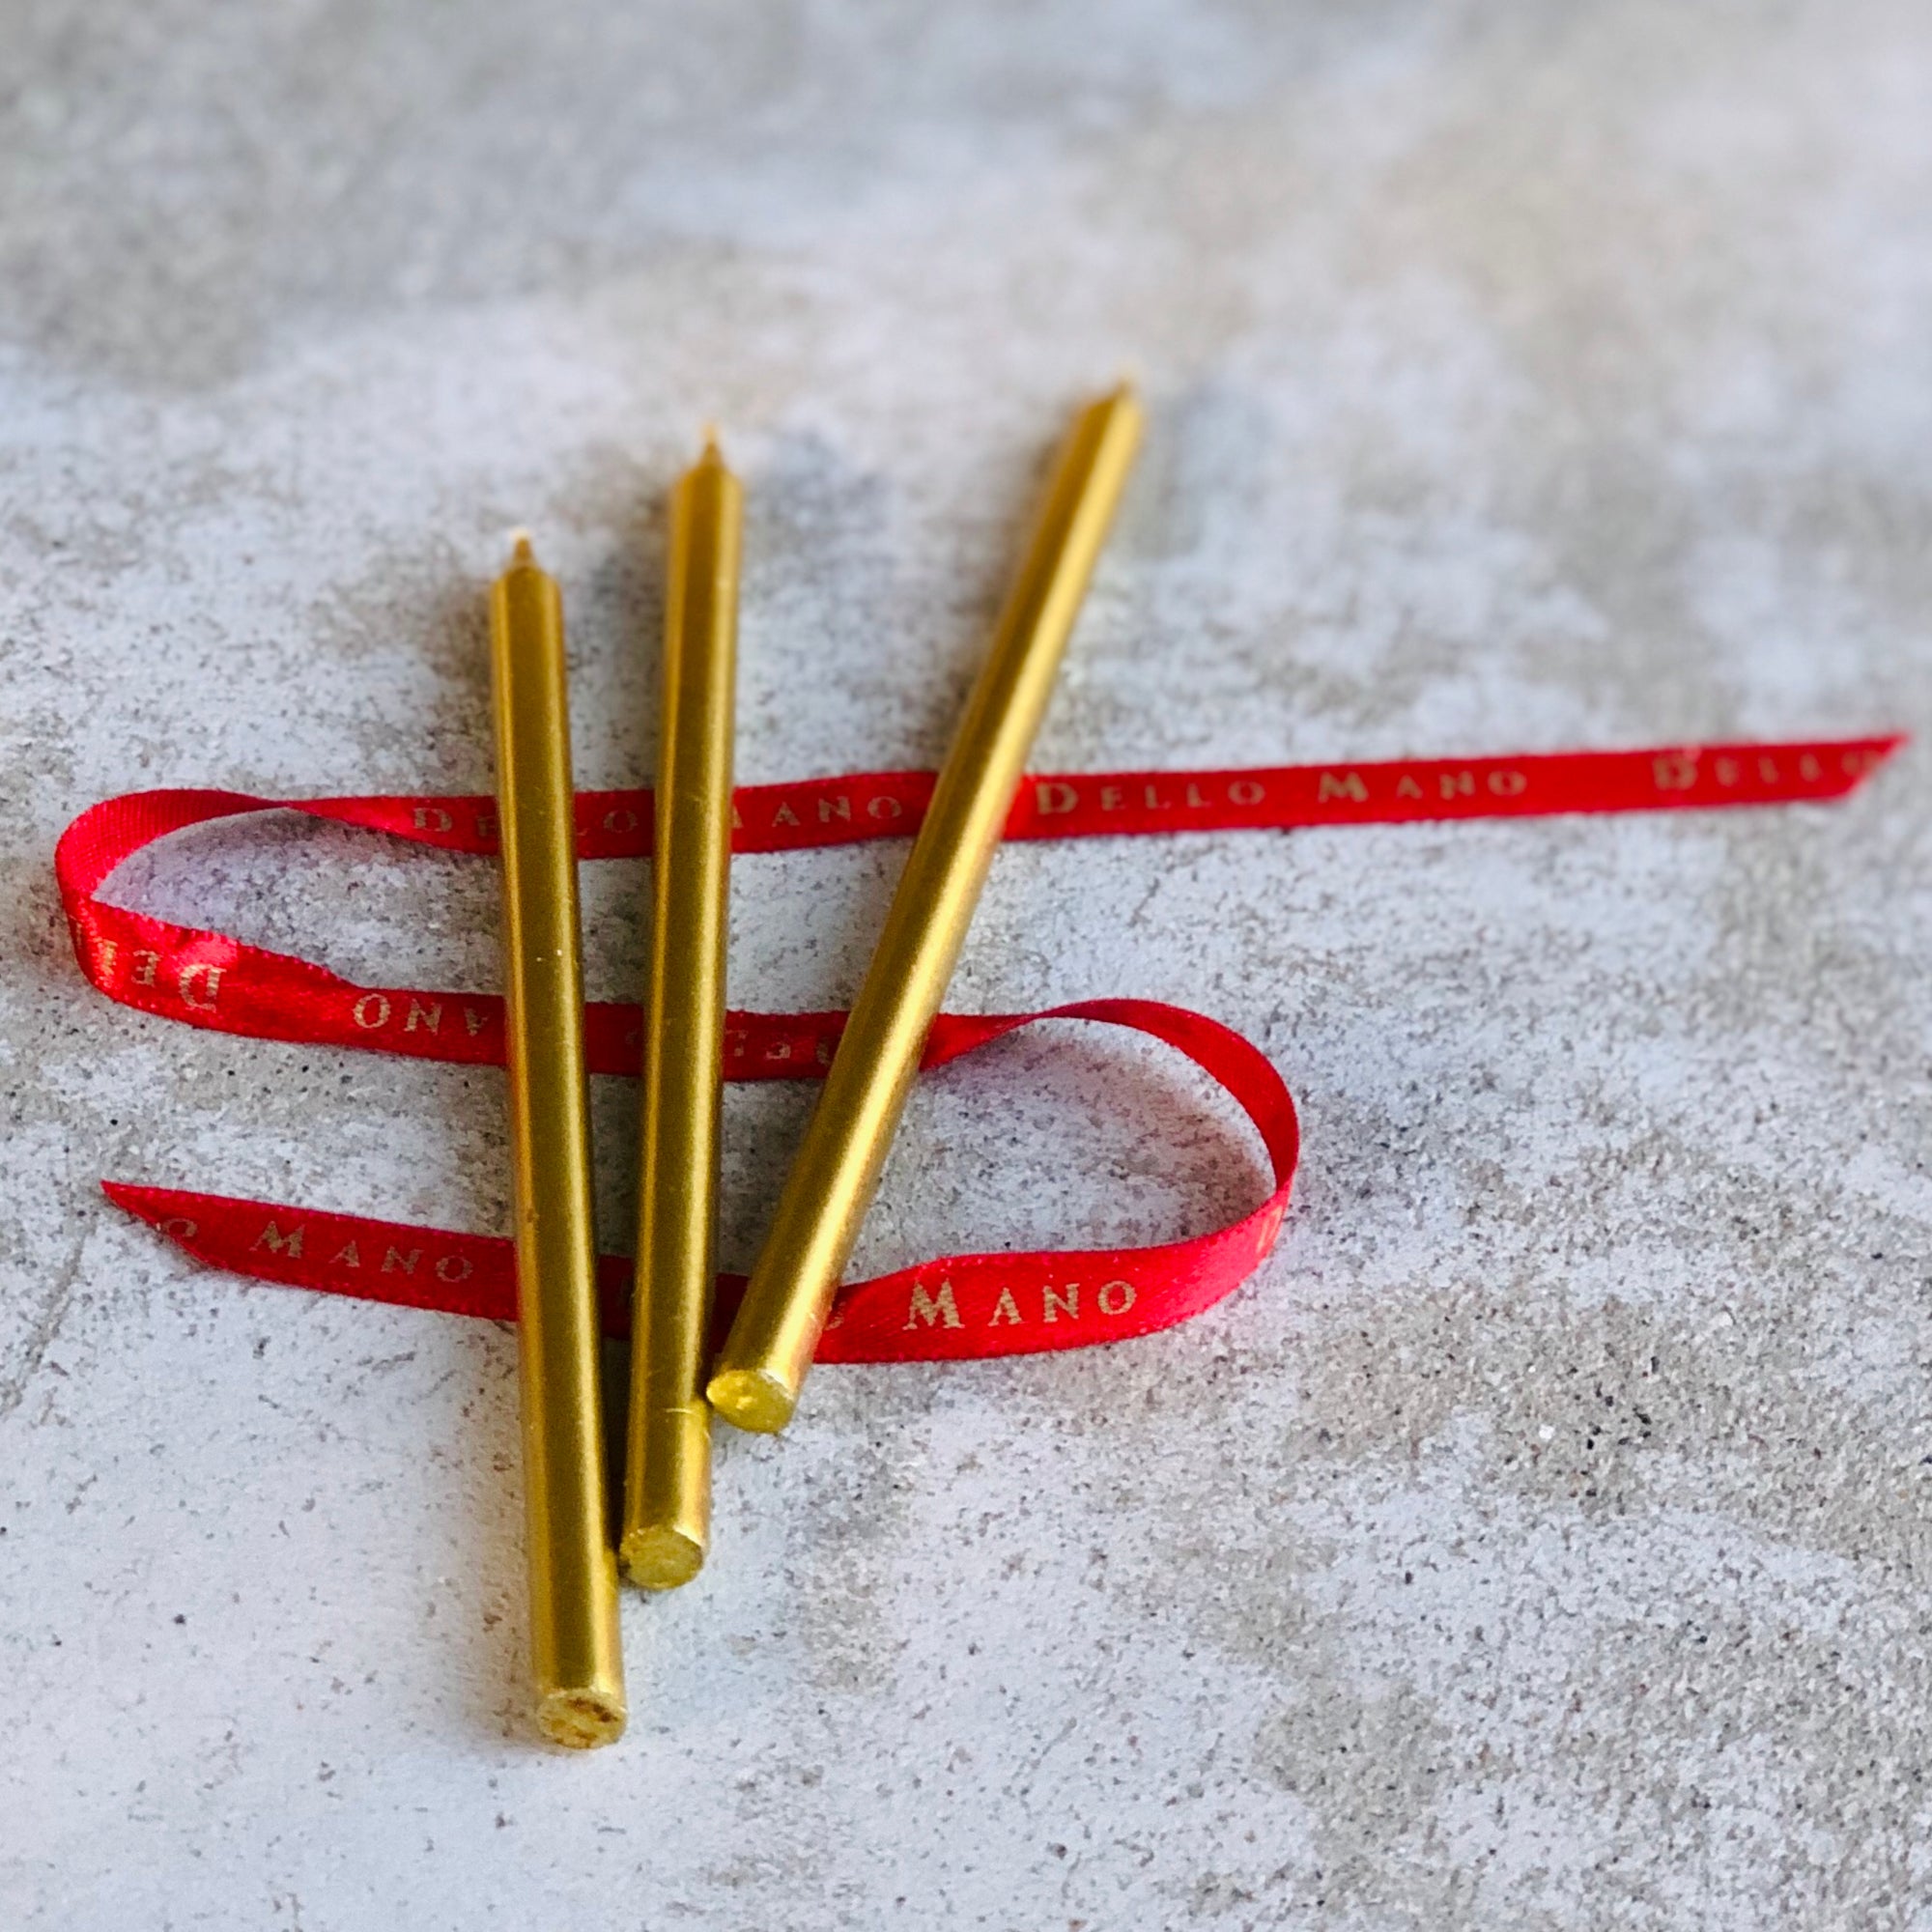 Dello Mano's signature gold candles resting on a red ribbon